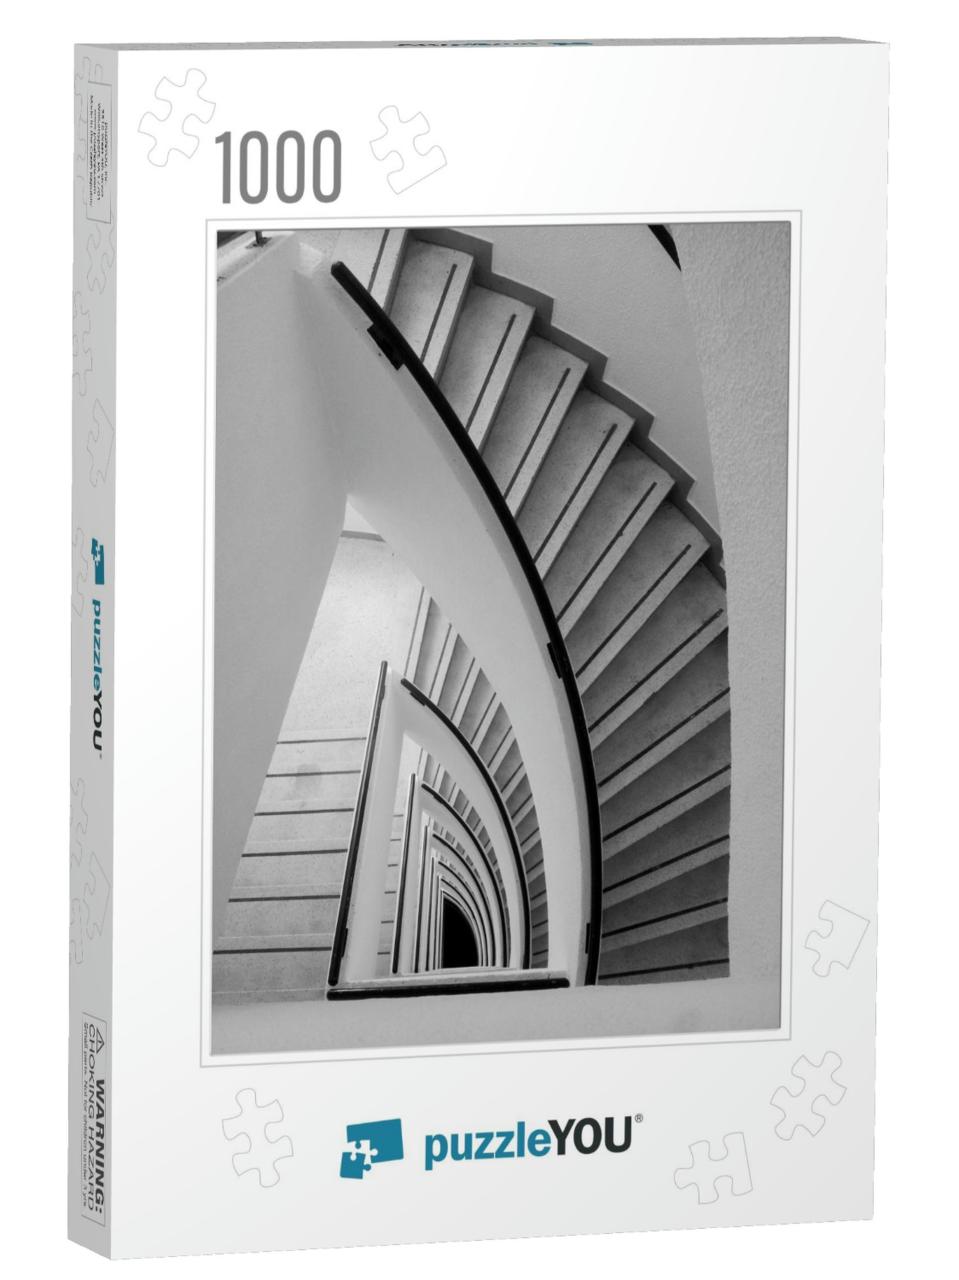 Spiral Staircase Decoration Interior - Black & White... Jigsaw Puzzle with 1000 pieces